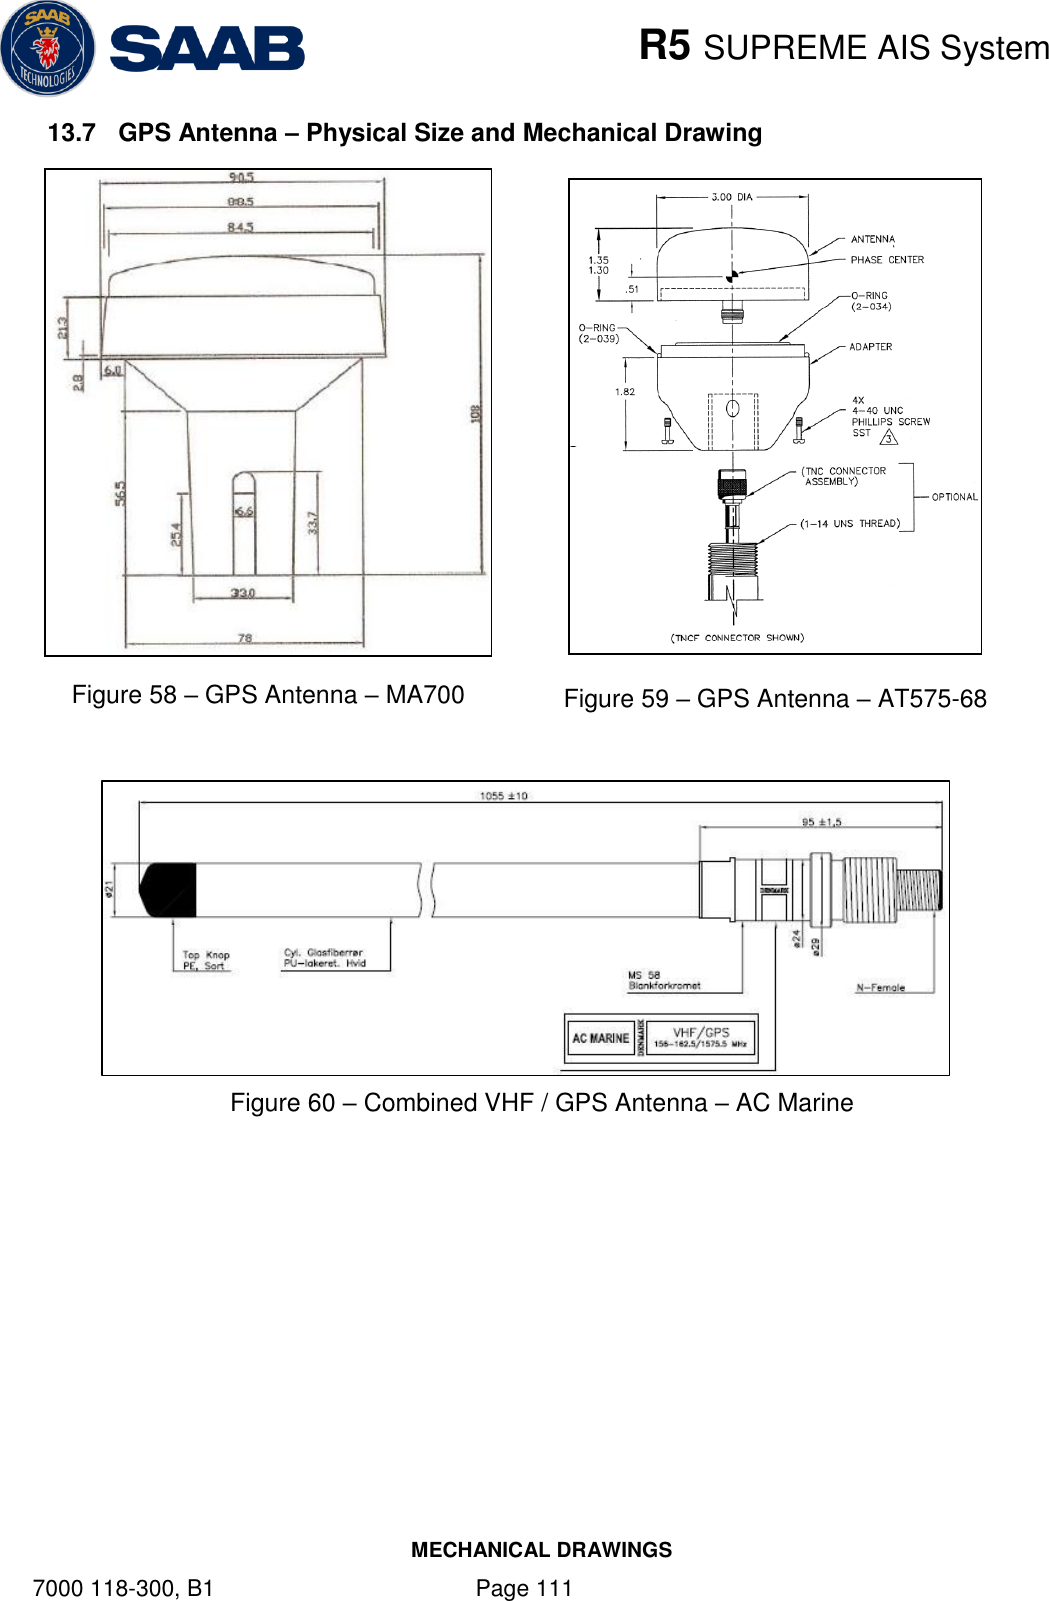    R5 SUPREME AIS System MECHANICAL DRAWINGS 7000 118-300, B1    Page 111 13.7  GPS Antenna – Physical Size and Mechanical Drawing                                   Figure 60 – Combined VHF / GPS Antenna – AC Marine  Figure 59 – GPS Antenna – AT575-68 Figure 58 – GPS Antenna – MA700 